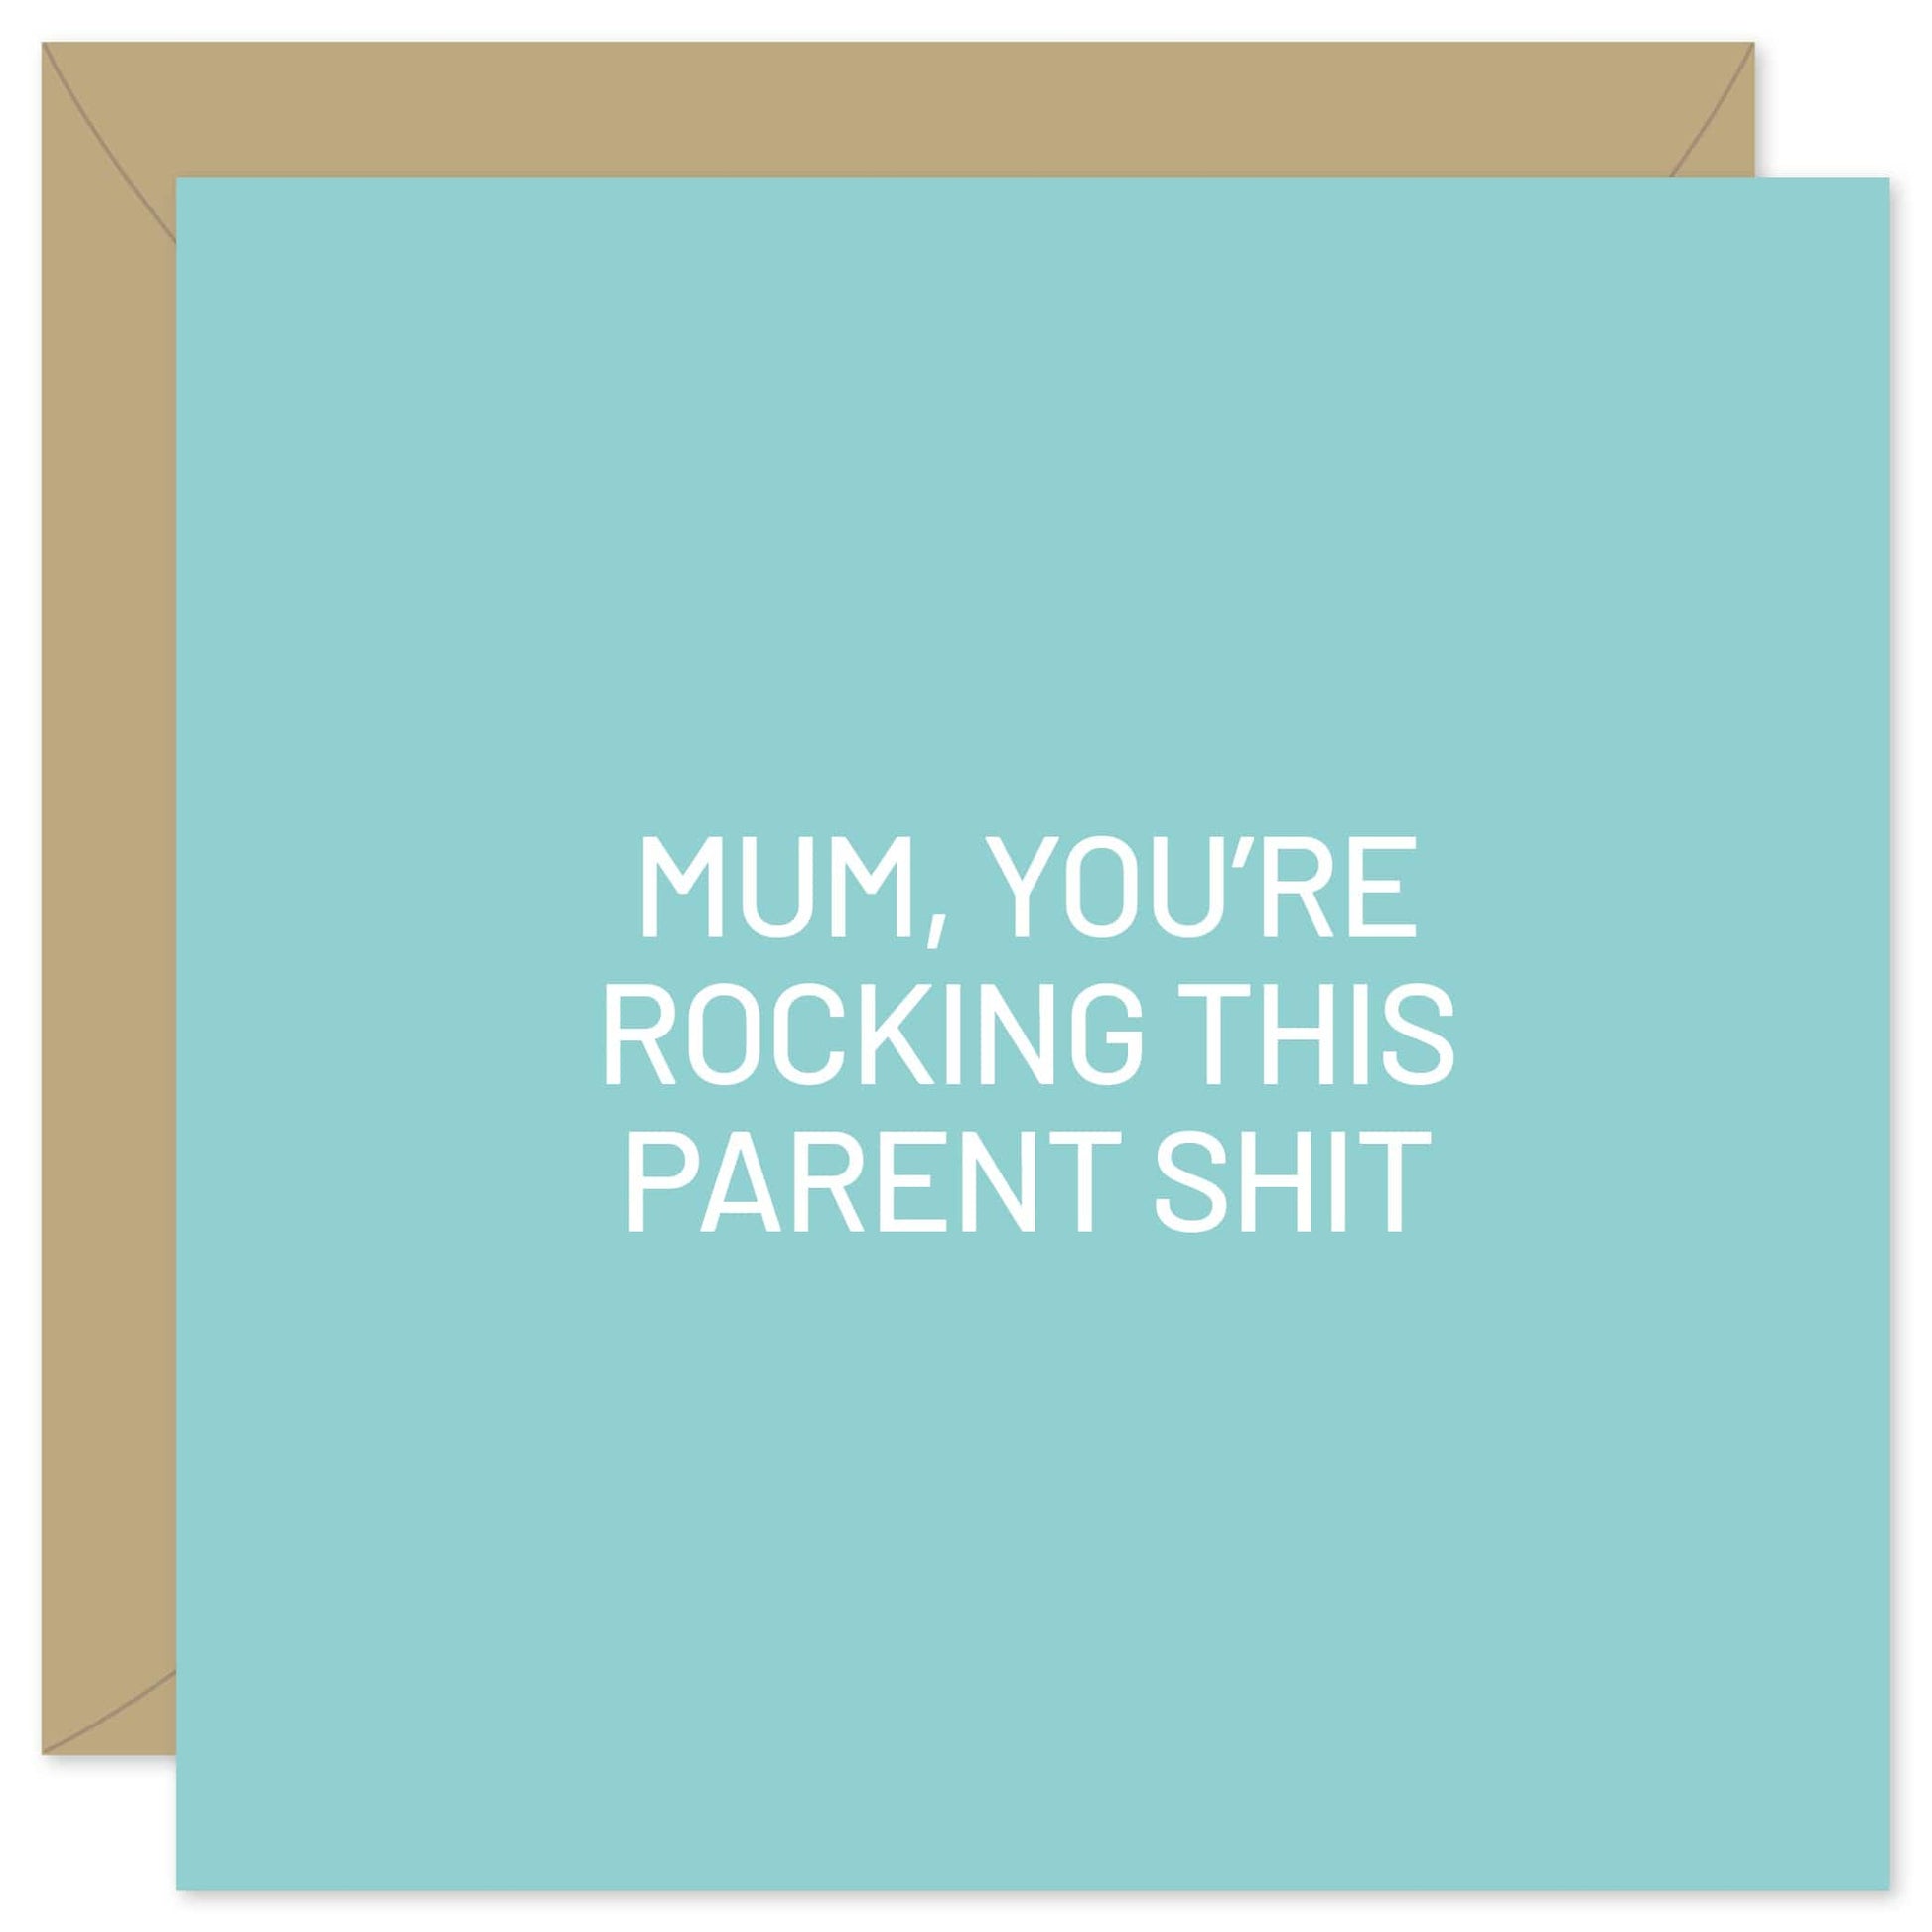 Mum you're rocking this parent shit card from Purple Tree Designs